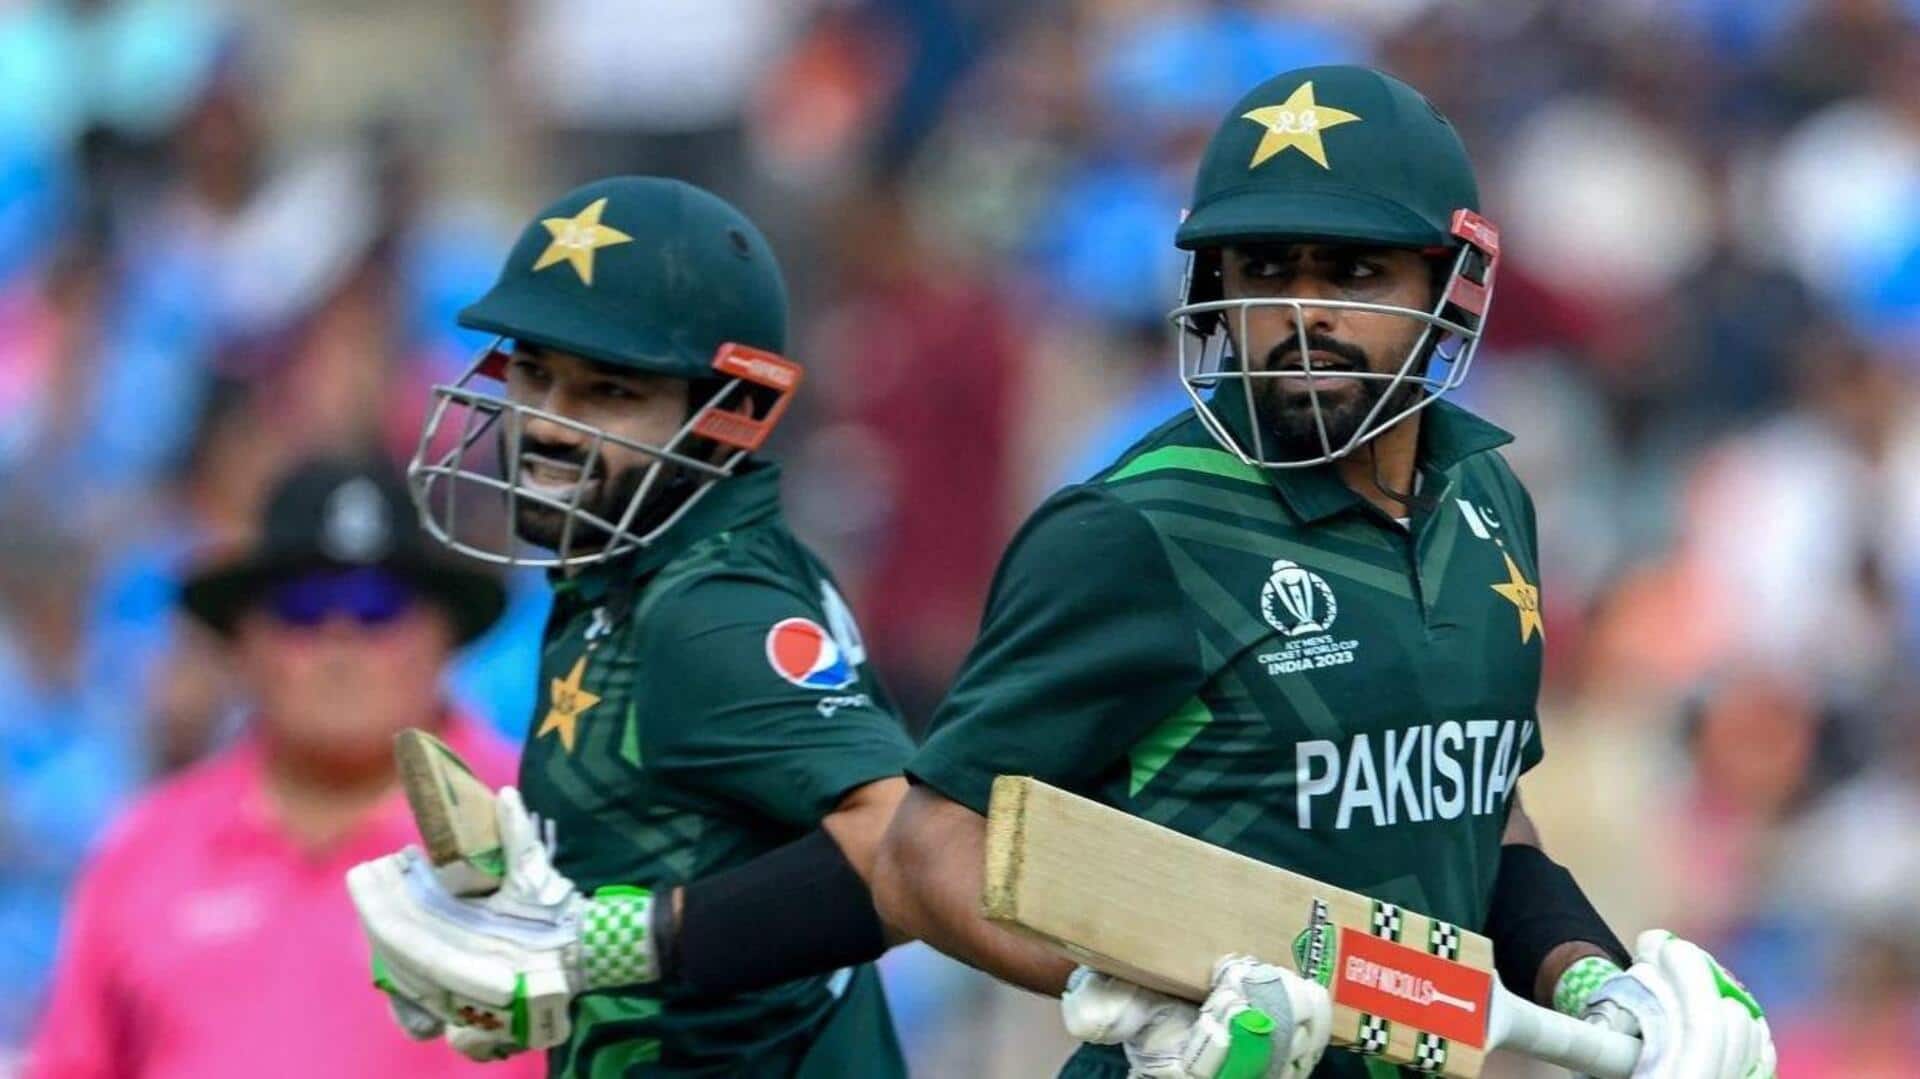 Babar Azam clocks his maiden ODI fifty against India: Stats